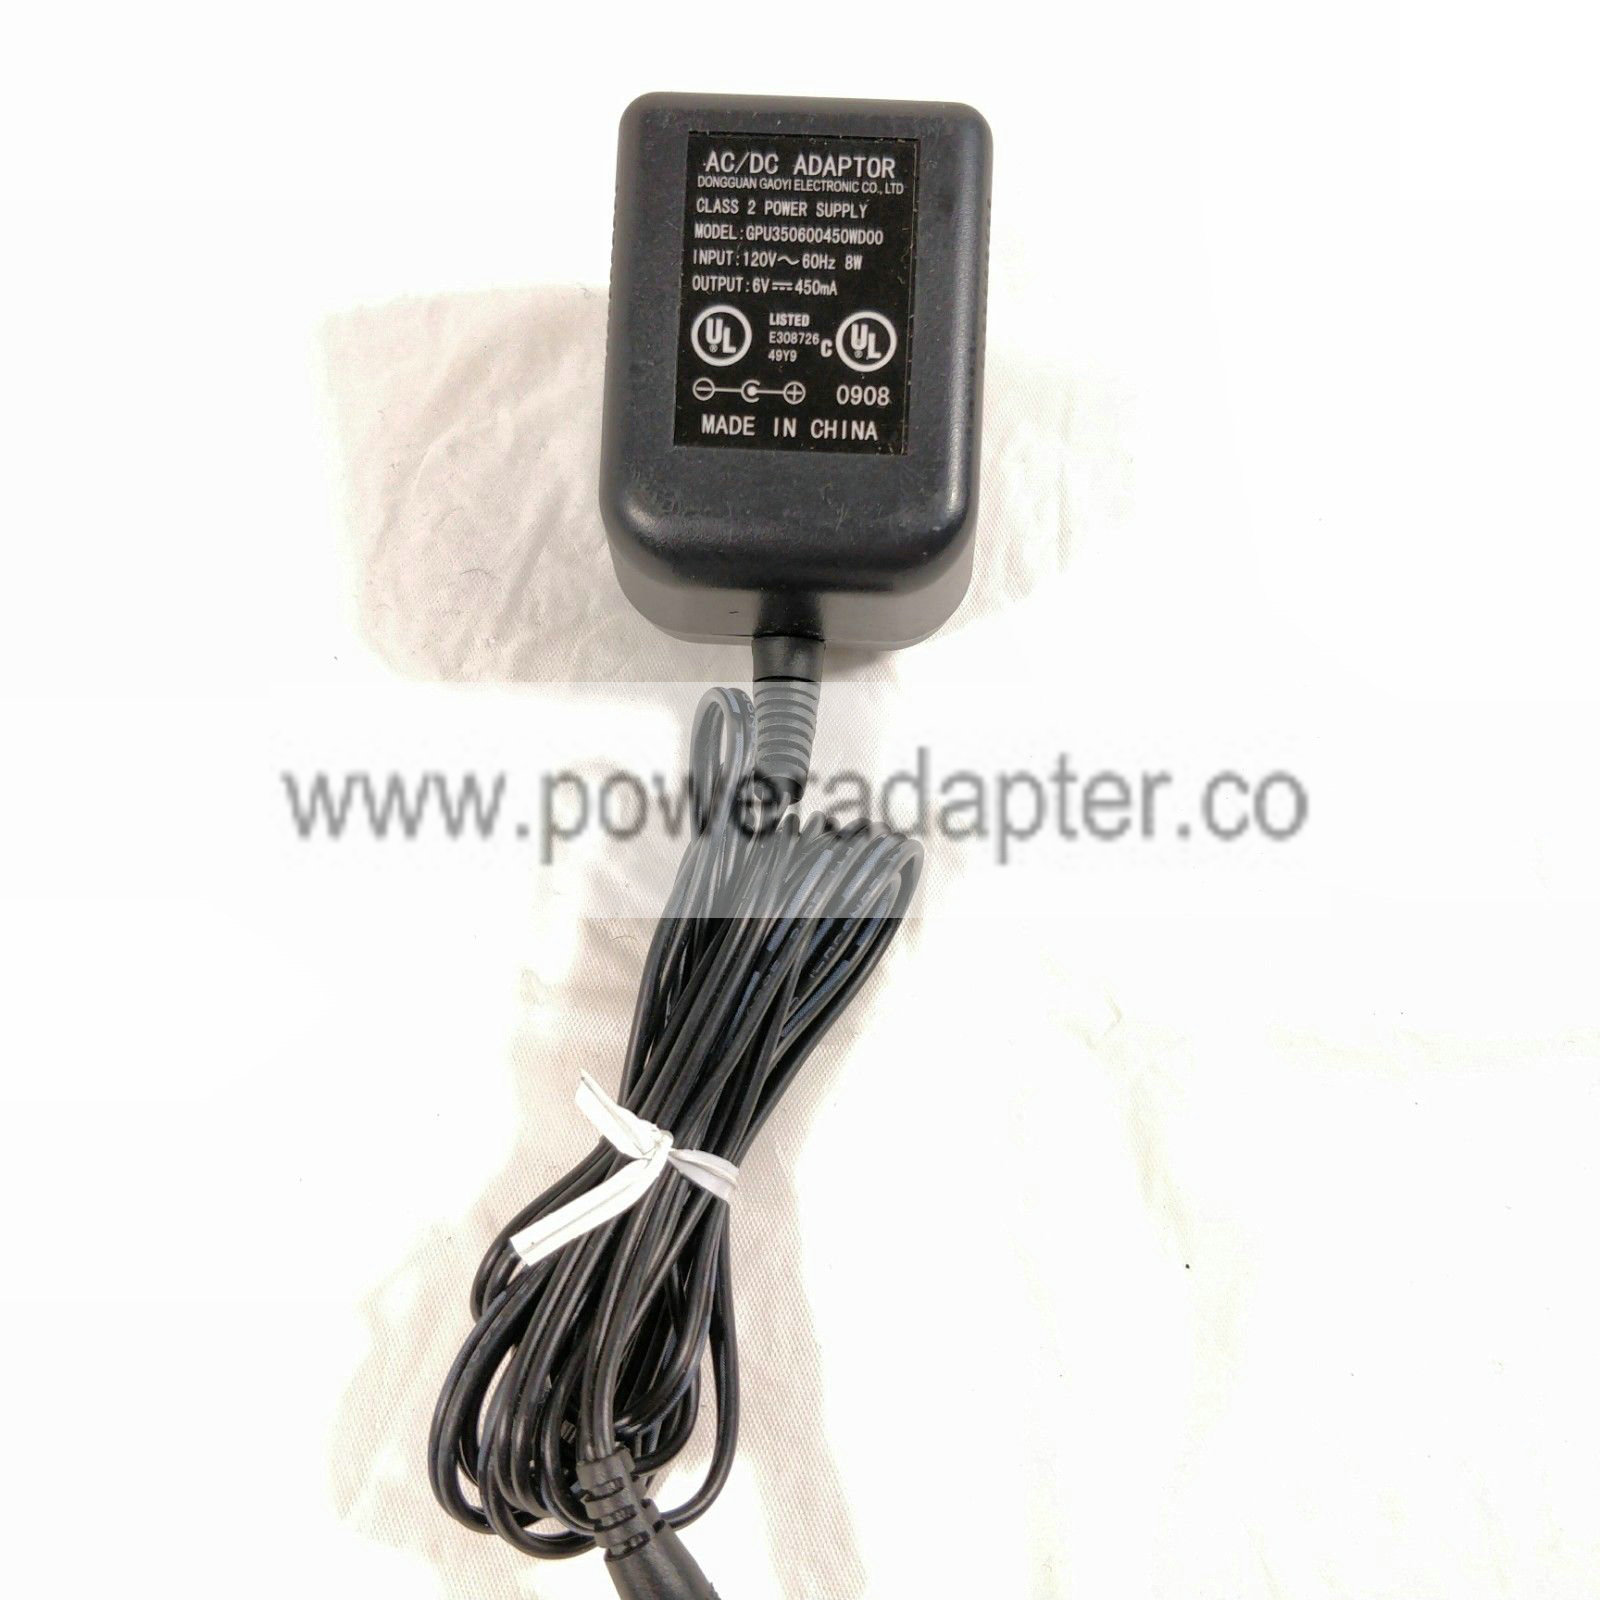 AC Adapter GPU350600450WD00 120v 60hz 80ma output 6v 450ma OEM Quick Info: Replacement Adapter! ☻Item: + AC Ad